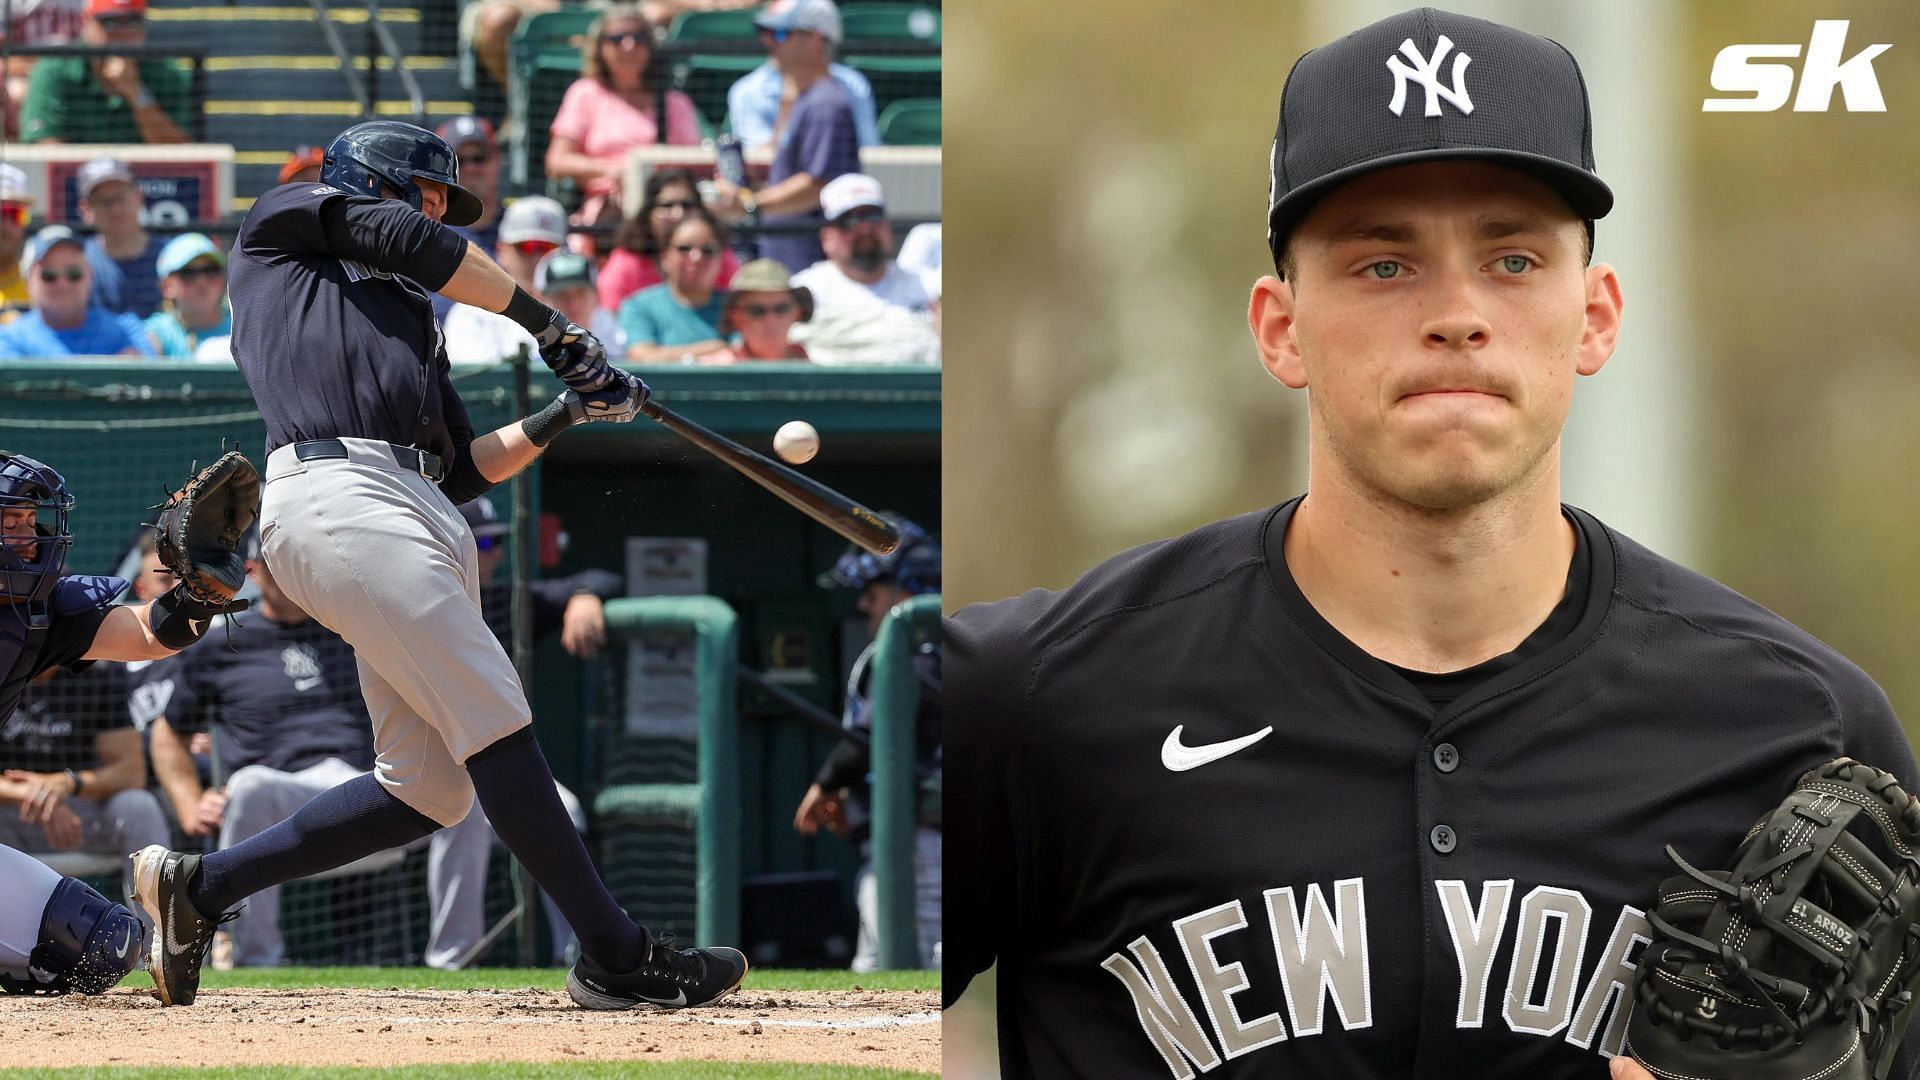 New York Yankees prospect Ben Rice is set to make his major league debut on Tuesday night